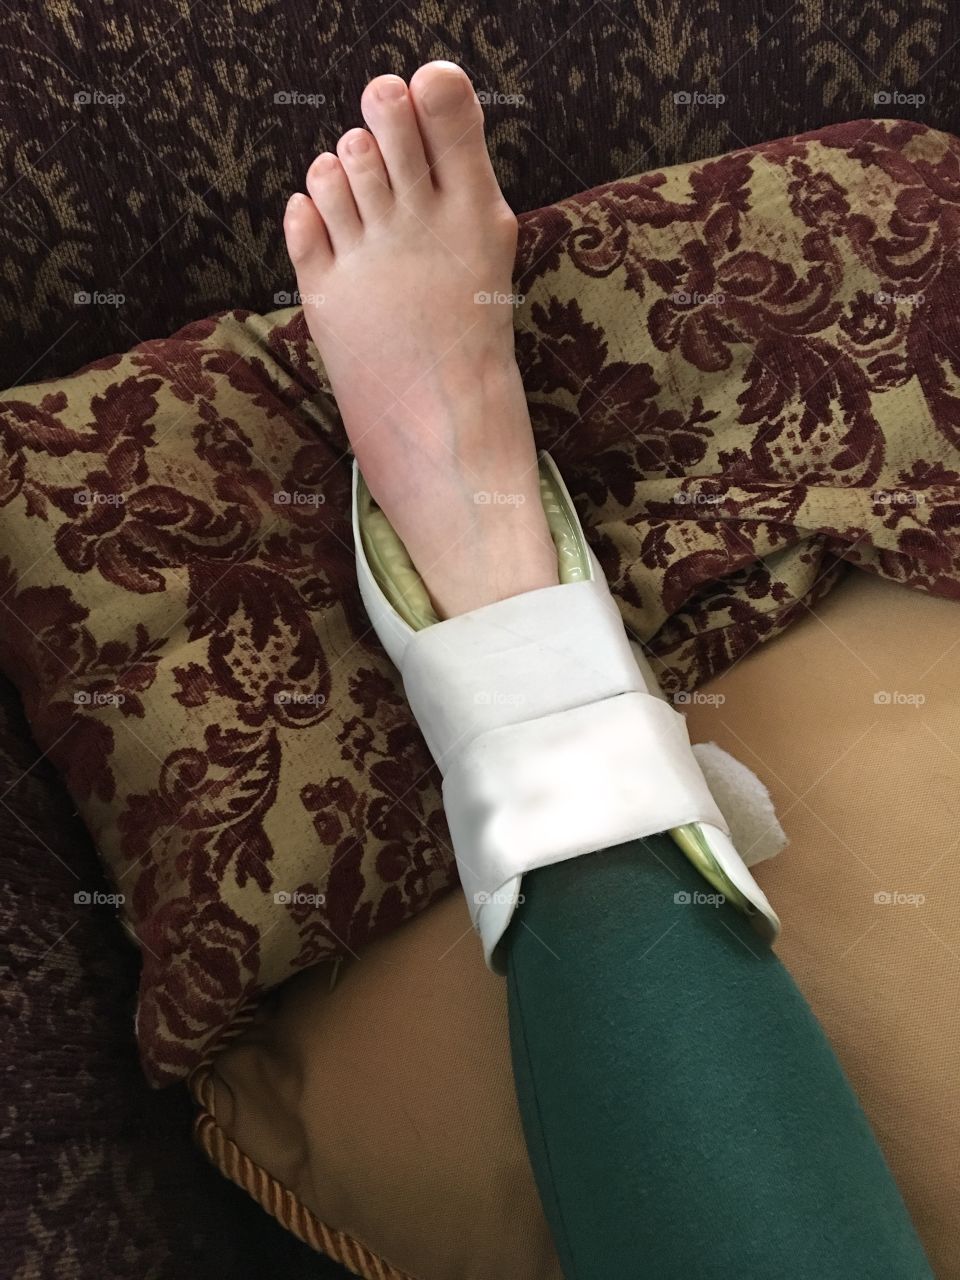 A woman’s injured foot in an ankle brace rests on a pile of sofa cushions